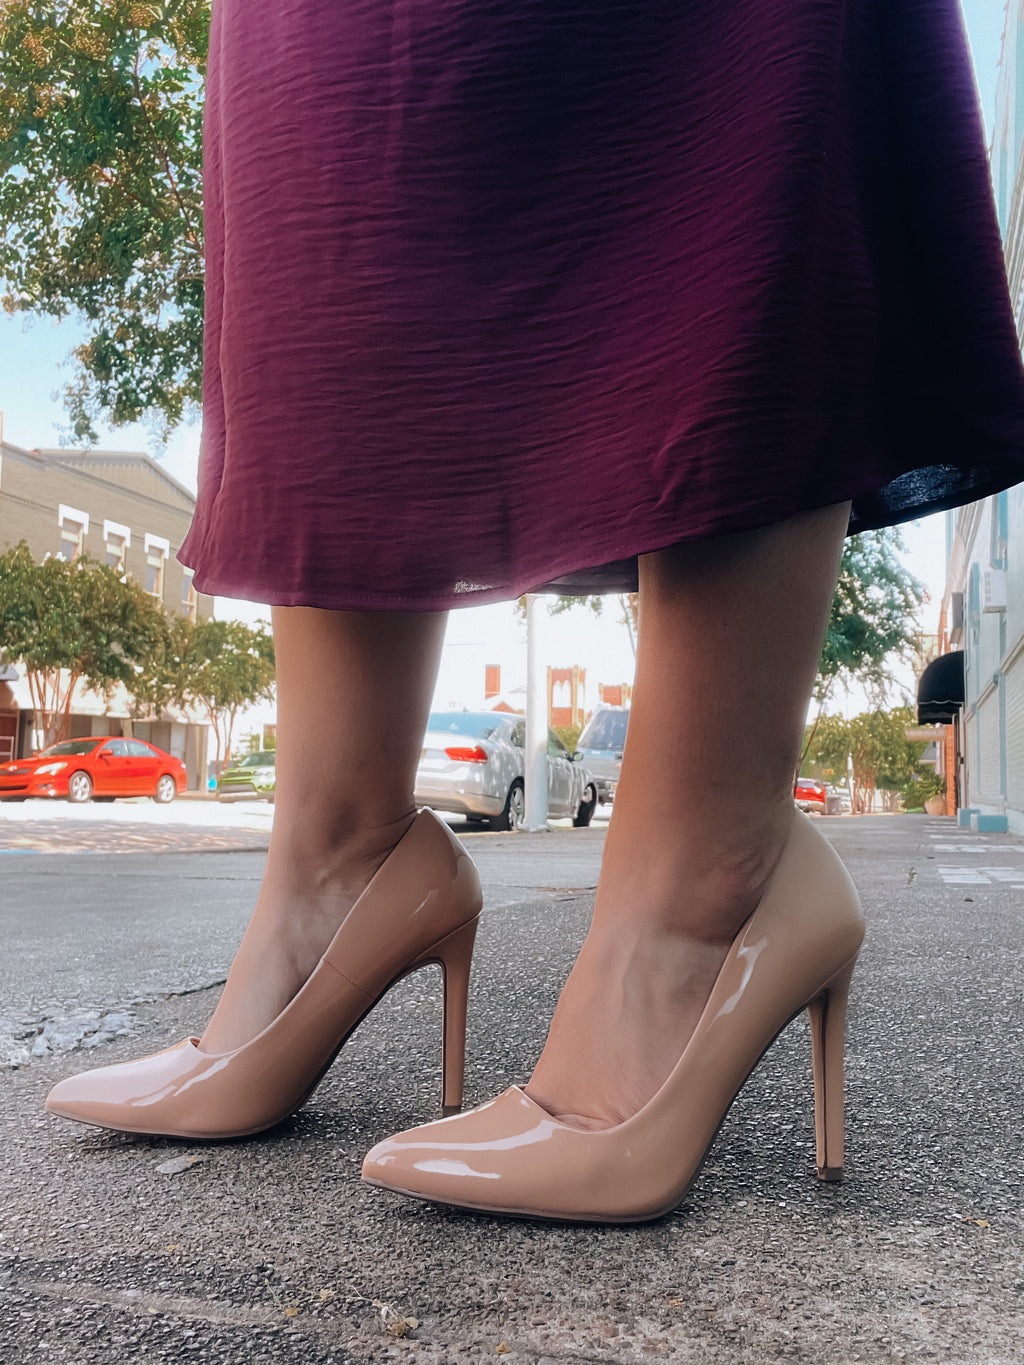 Heels feature a simple nude color, point toe detail, pump heel and runs true to size! 